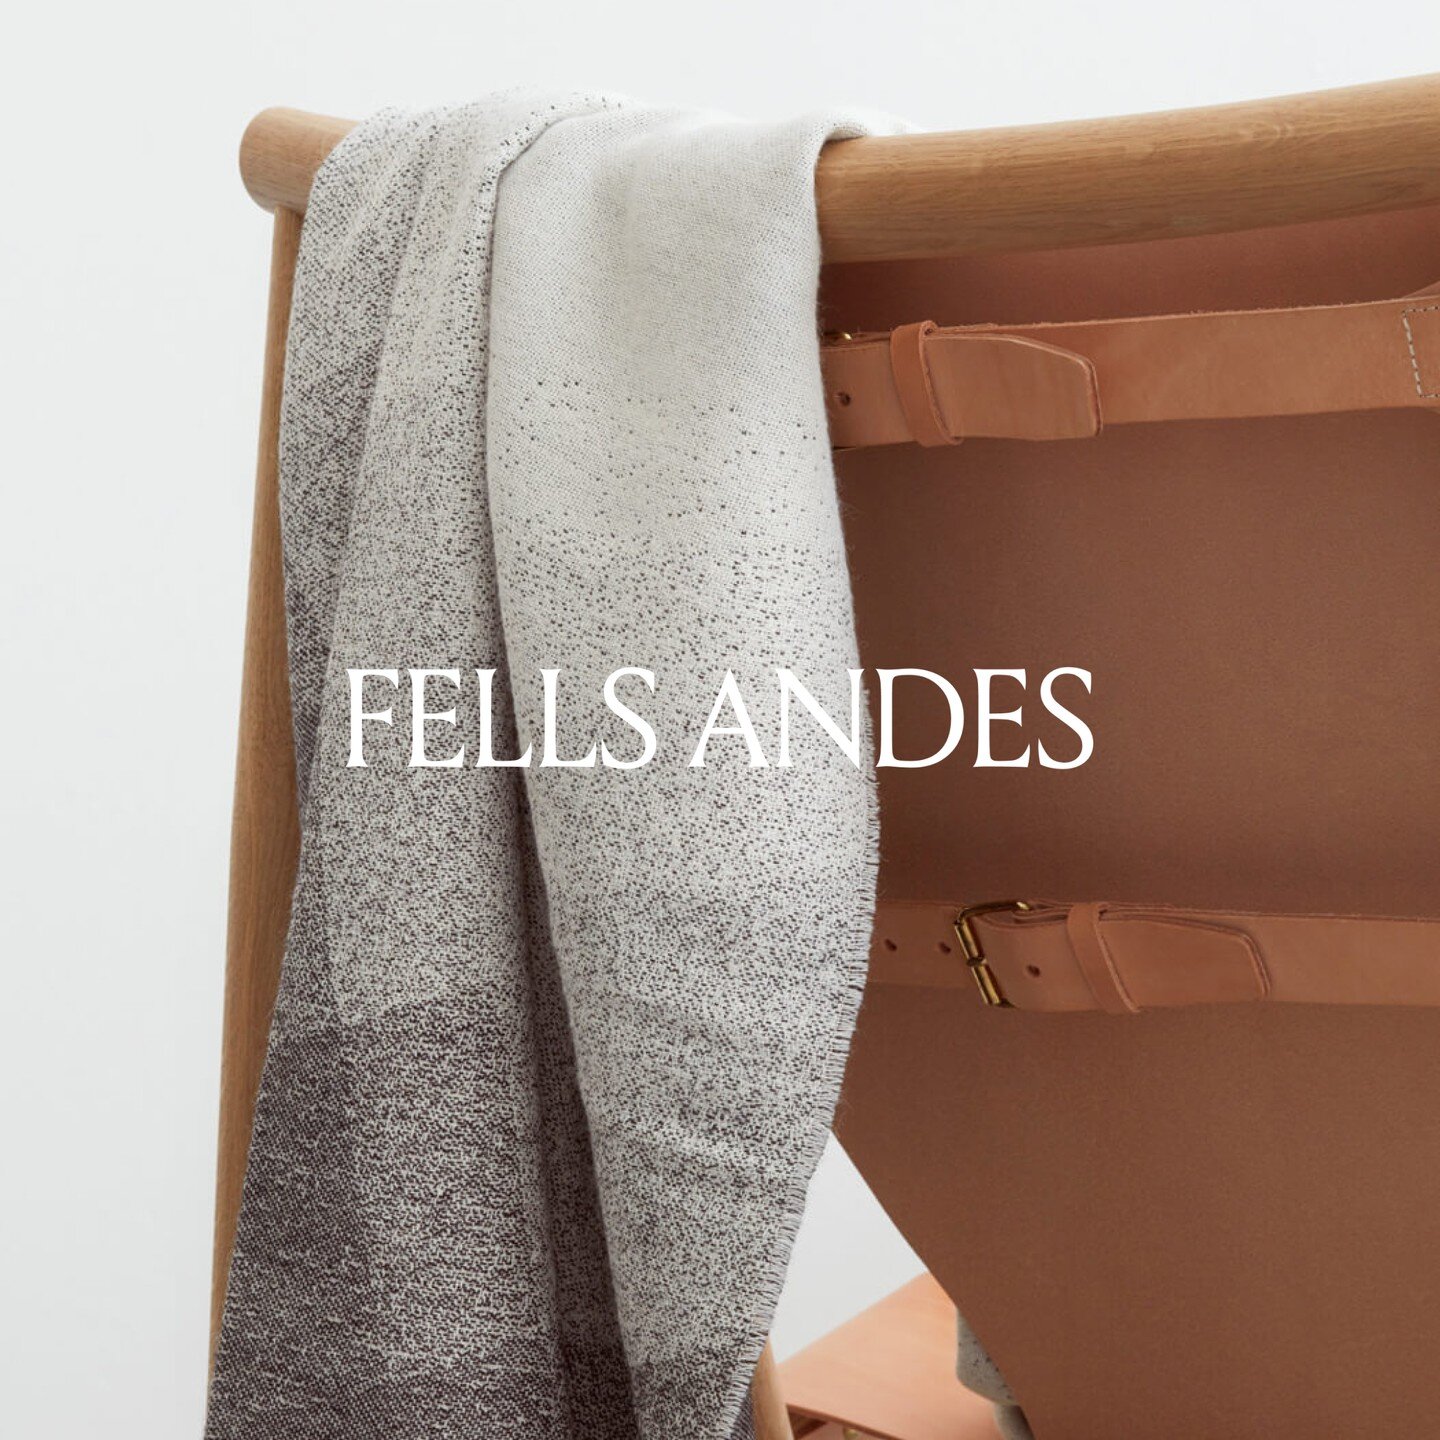 The Fells Andes Luft Throw. A twist on traditional d&eacute;grad&eacute;, the Luft keeps the chill at bay and adds a touch of modernity to any lounge.

Made purely from one of the rarest, softest, most luxurious fibers in the world &ndash; Peruvian B